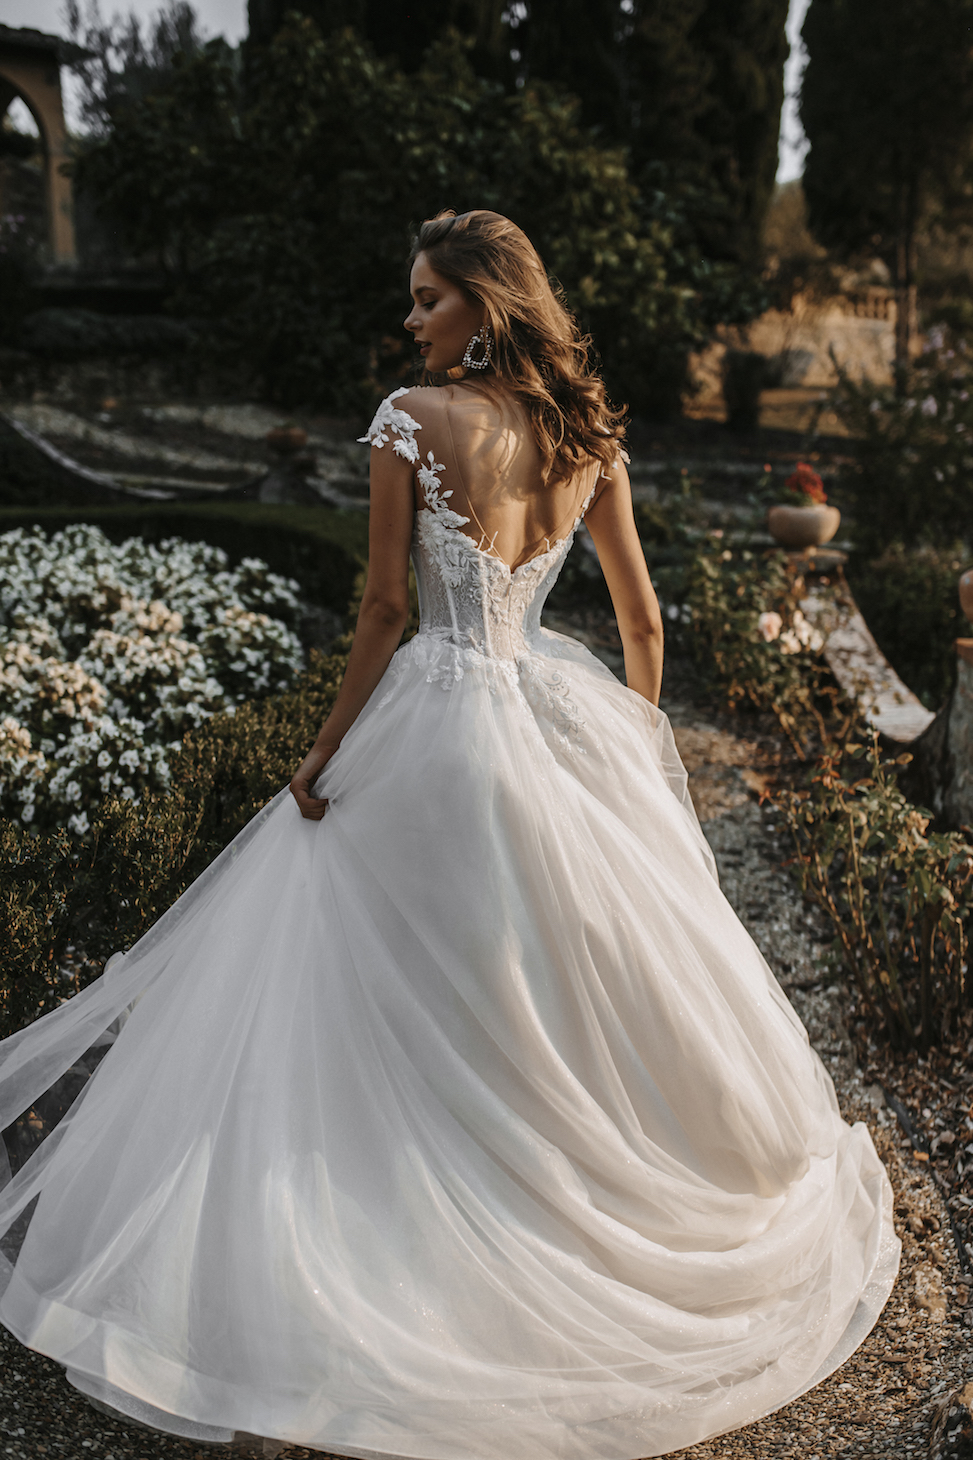 Woman twirling in a garden in a white ballgown style wedding dress